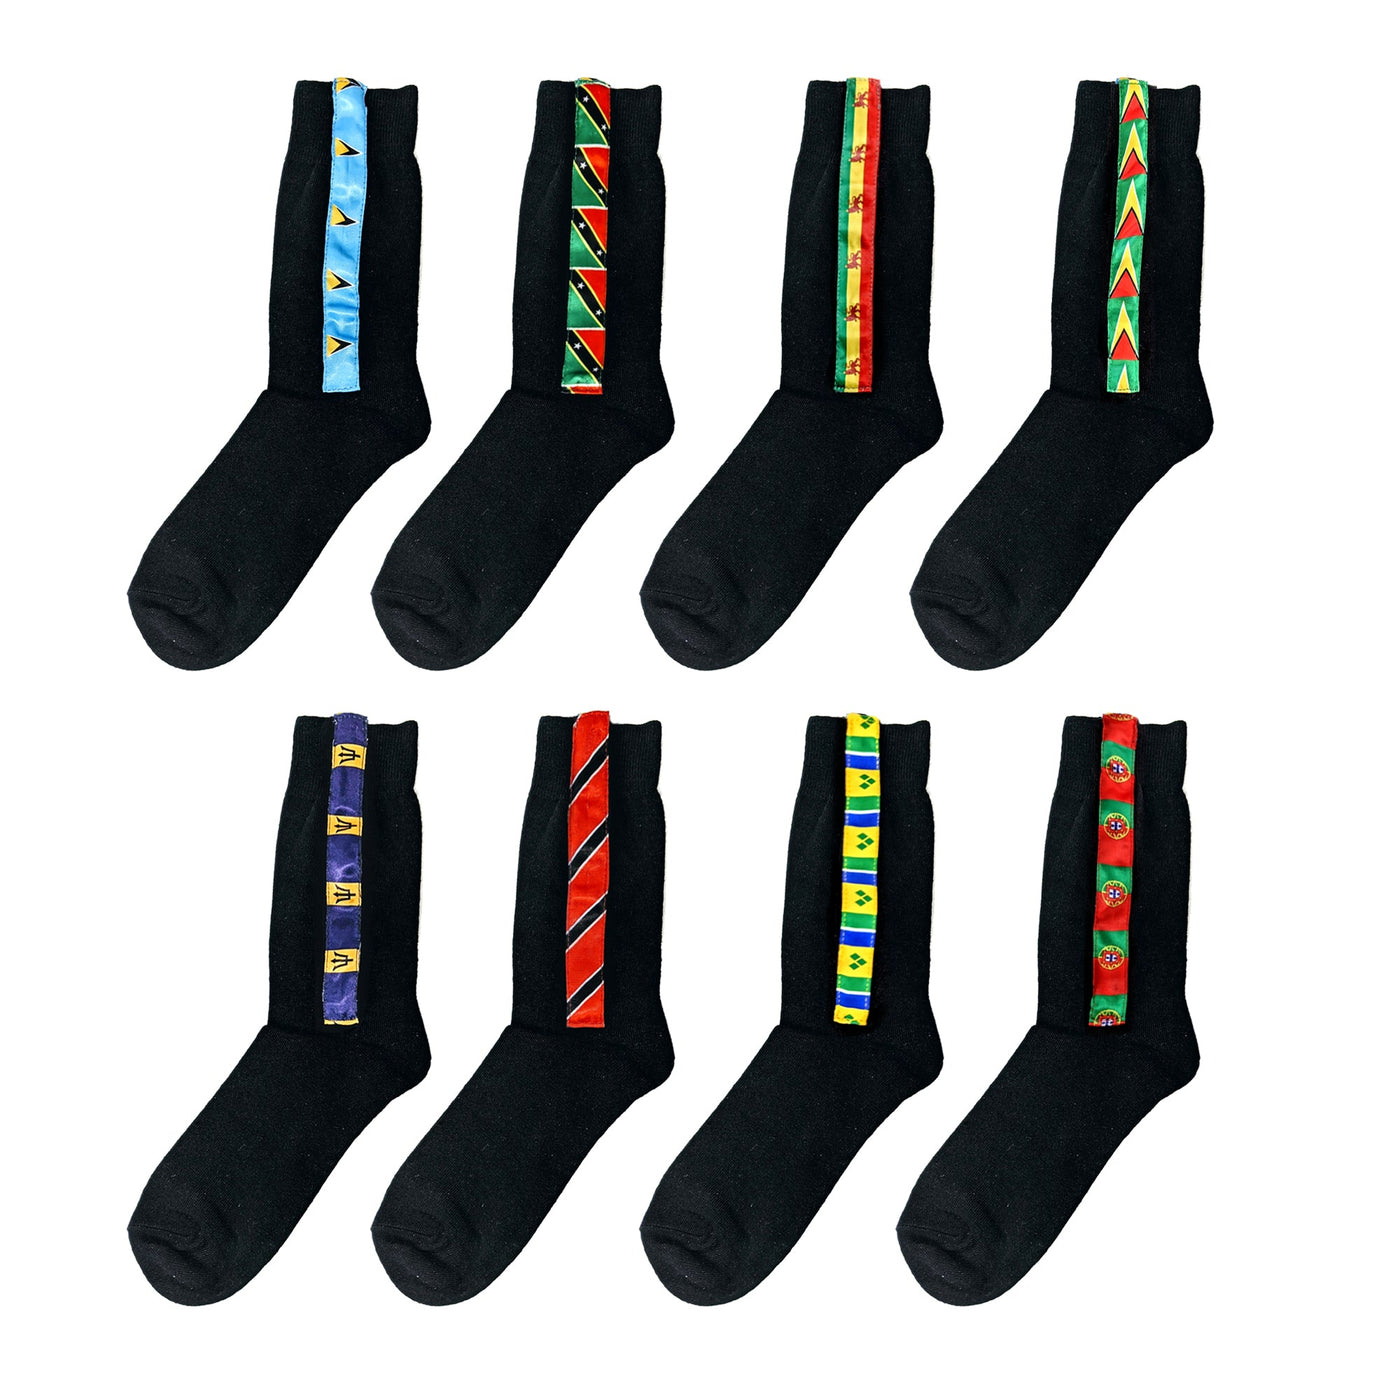 Socks with South Africa Flag